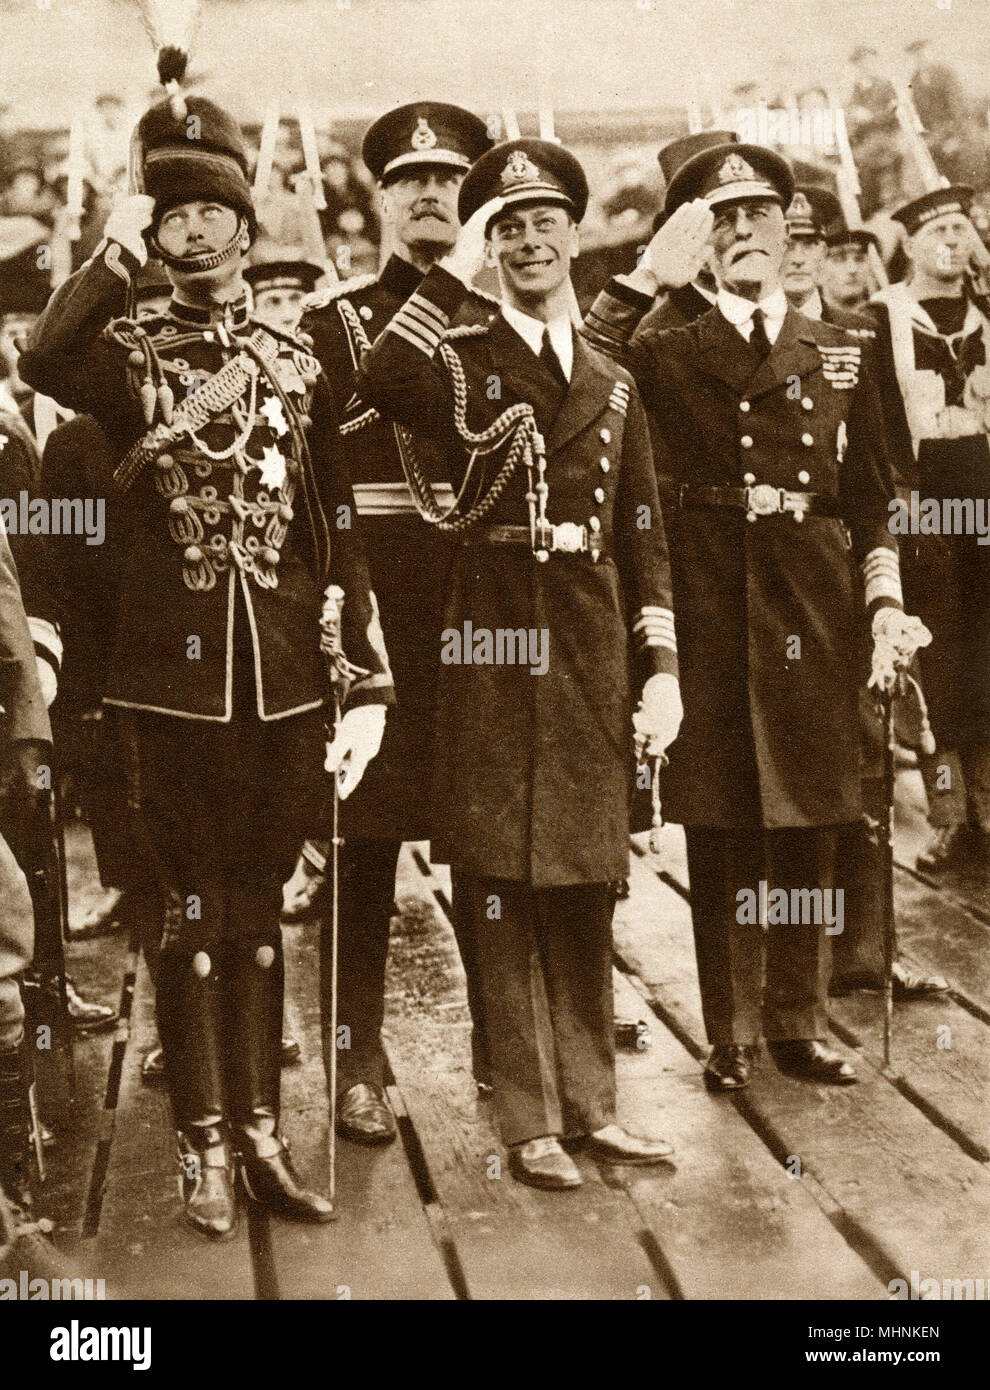 Edward Prince of Wales (1894-1972) (later King Edward VIII) and Prince Henry, Duke of Gloucester (1900-1974) salute the return of Albert, Duke of York (1895-1952) (later King George VI) from a seven-month Imperial Tour - October 1925. Arriving on HMS Repulse at Portsmouth Harbour.     Date: 1925 Stock Photo